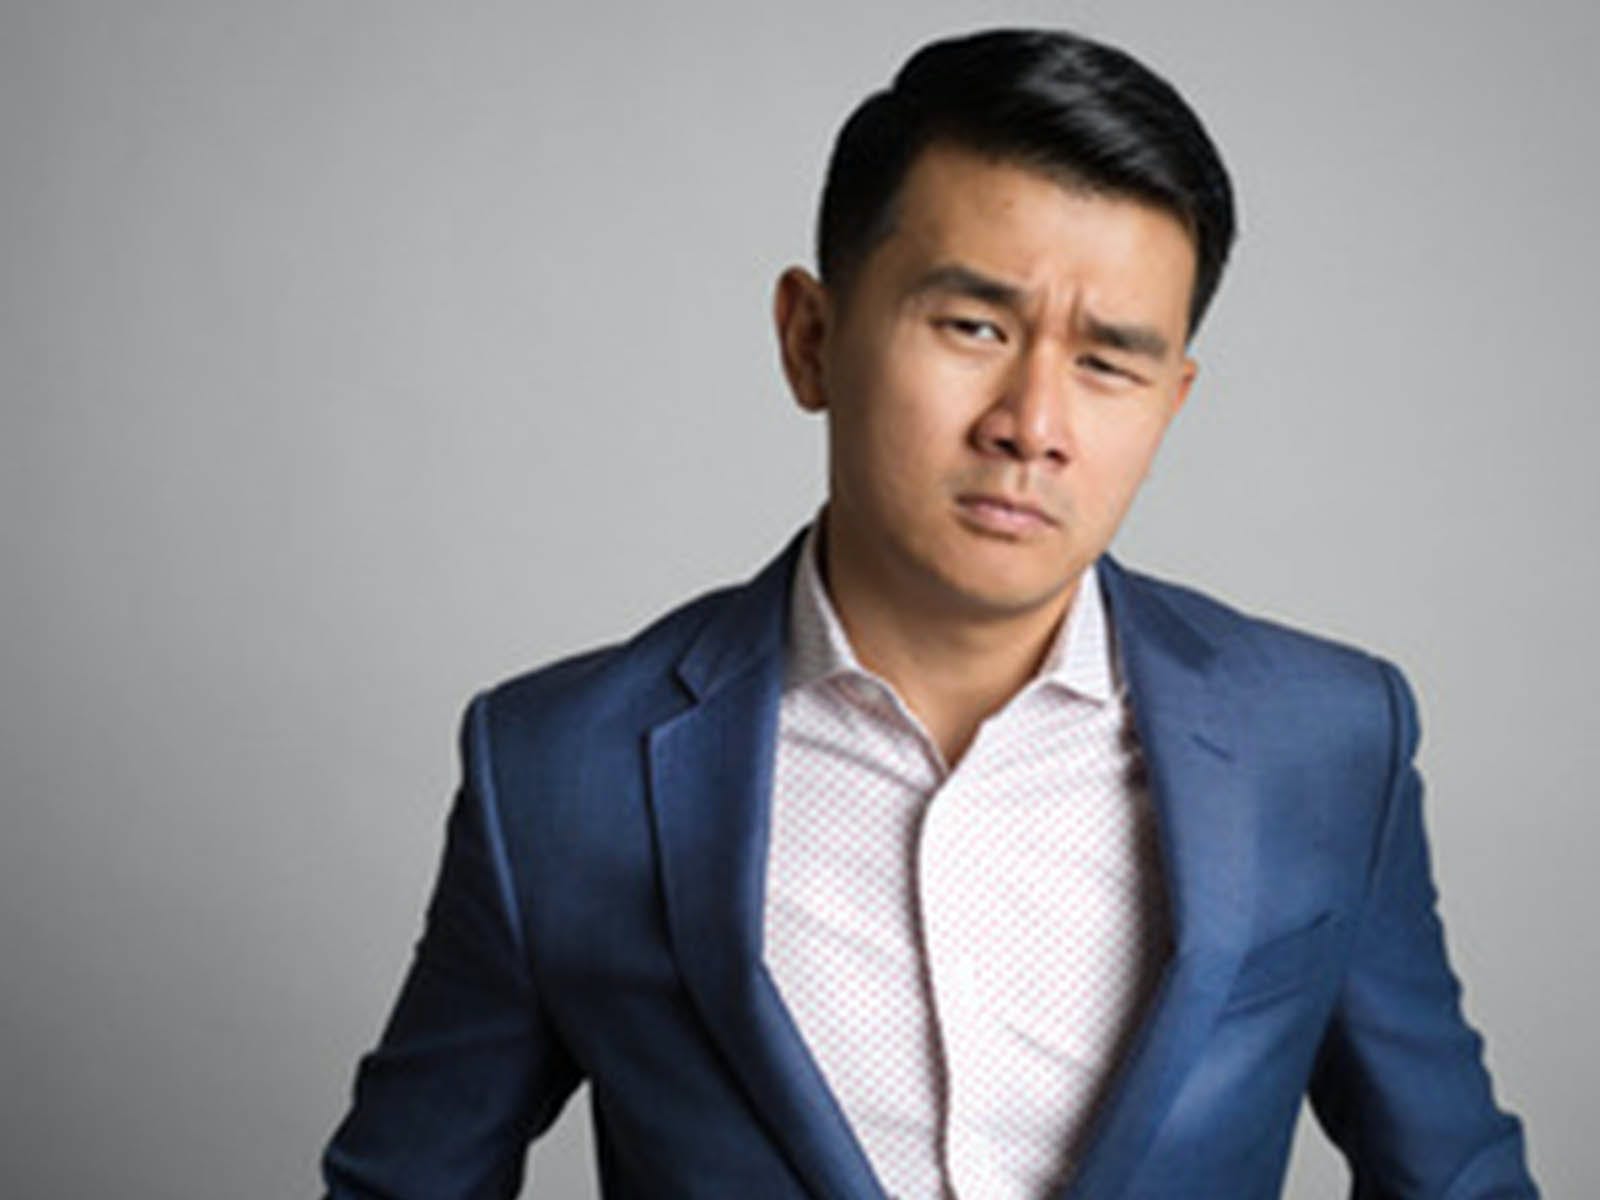 RonnyChieng